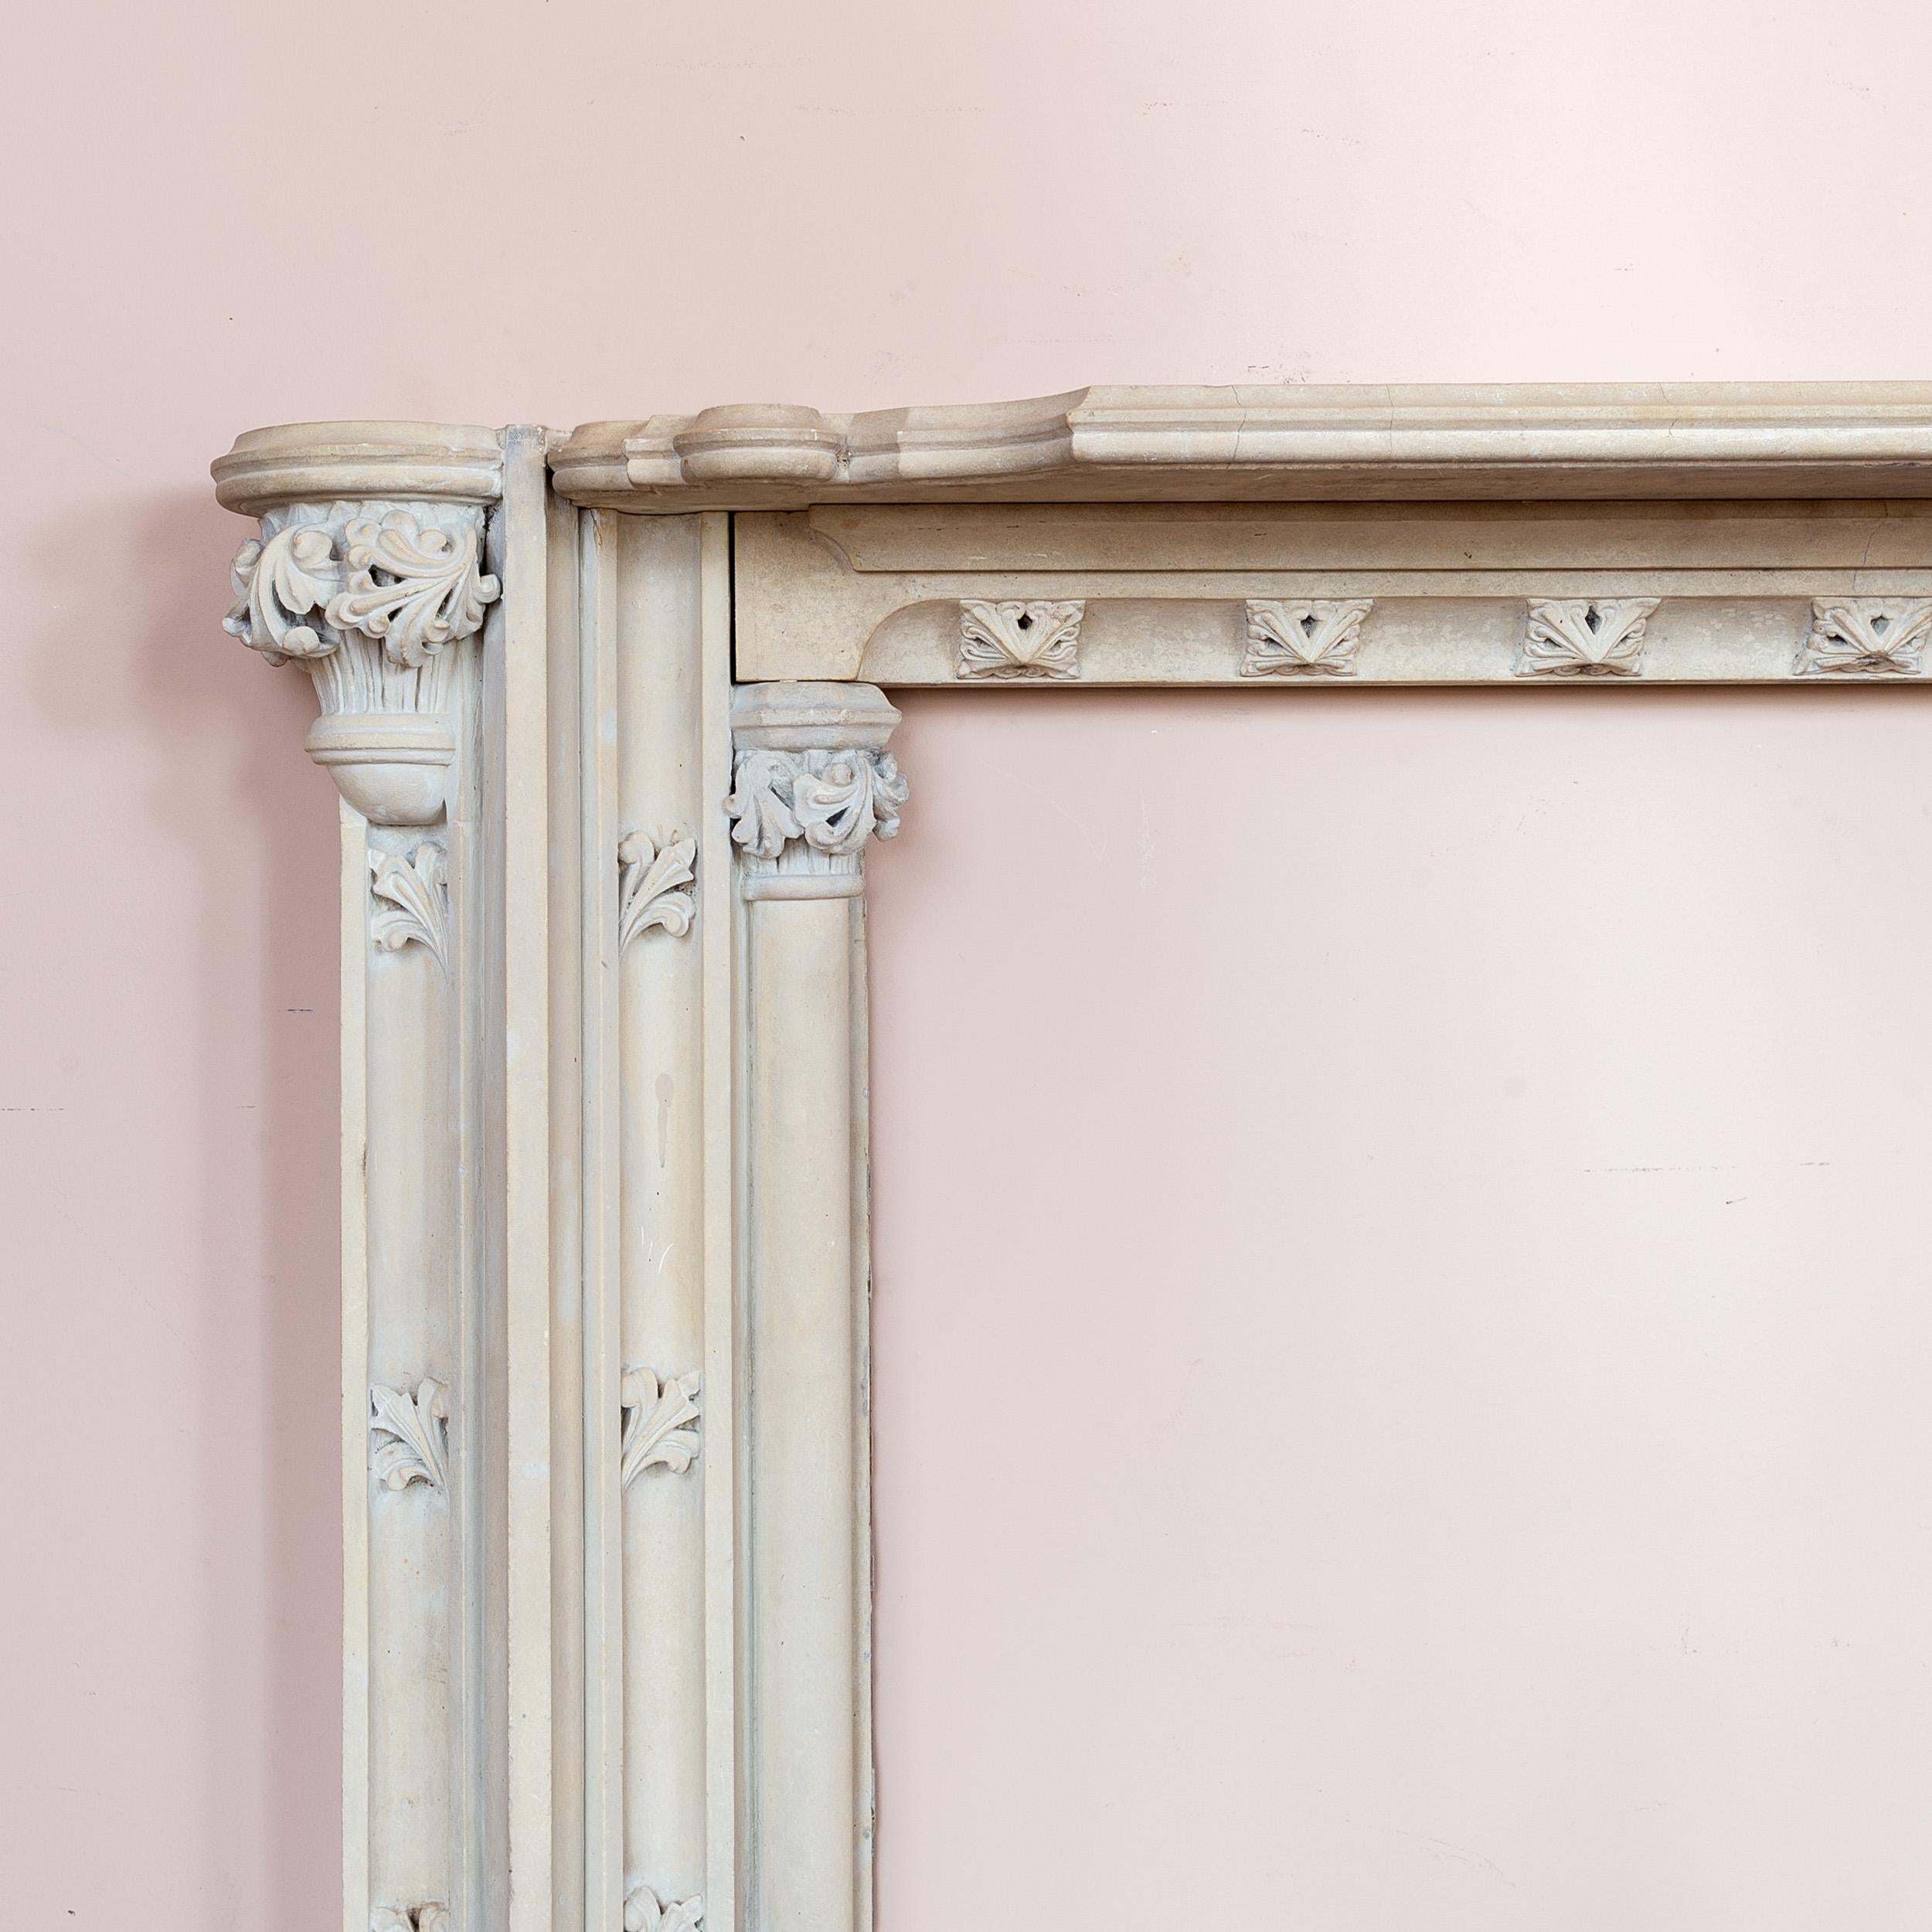 A fine Regency Gothic Revival Painswick stone fire surround, early nineteenth century, the elaborately shaped and moulded shelf above frieze with bed-mould and canted lower-lip with square fleur-de-lys paterae, the moulded jambs with foliate